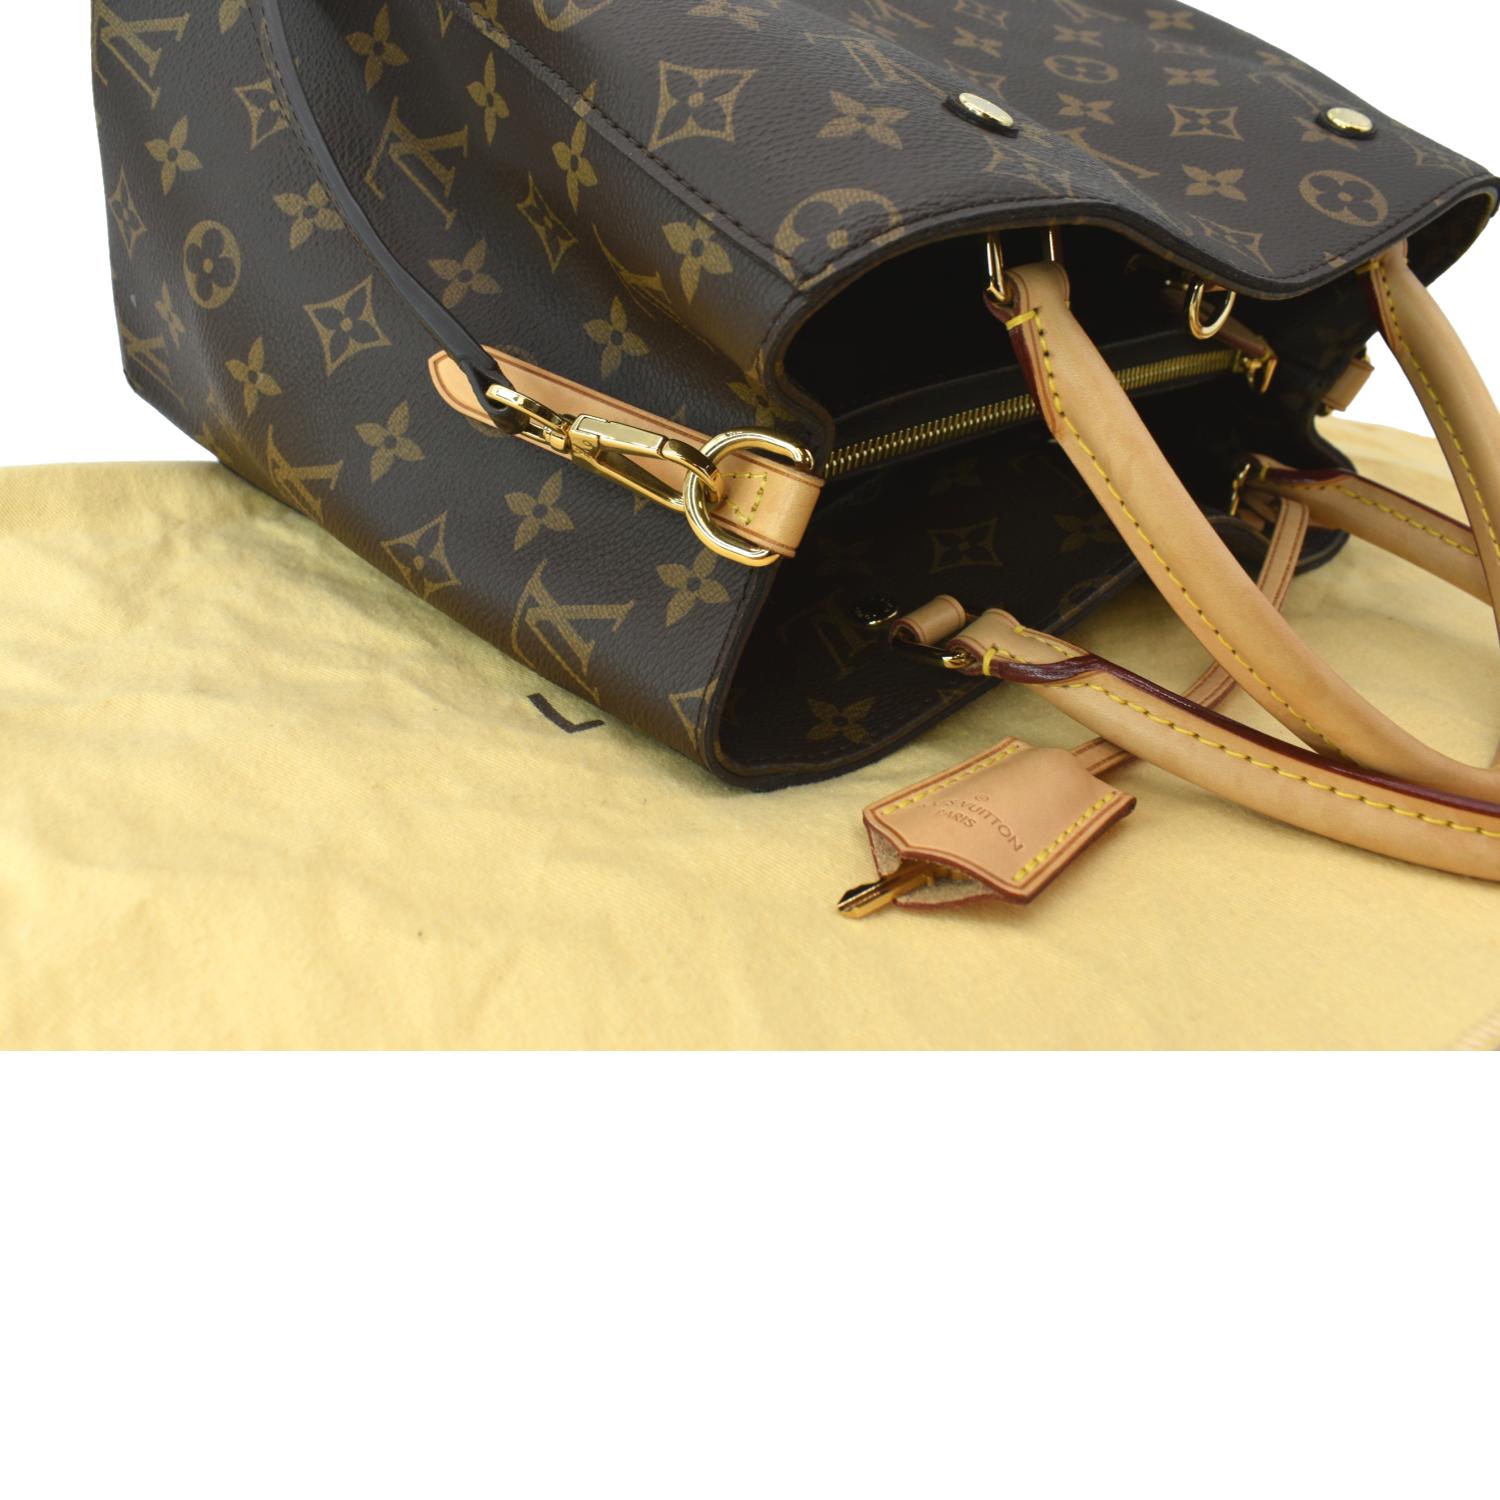 Louis Vuitton Montaigne is the new 'It' bag for 2014  Louis vuitton new  bags, Louis vuitton monogram handbags, Louis vuitton handbags outlet